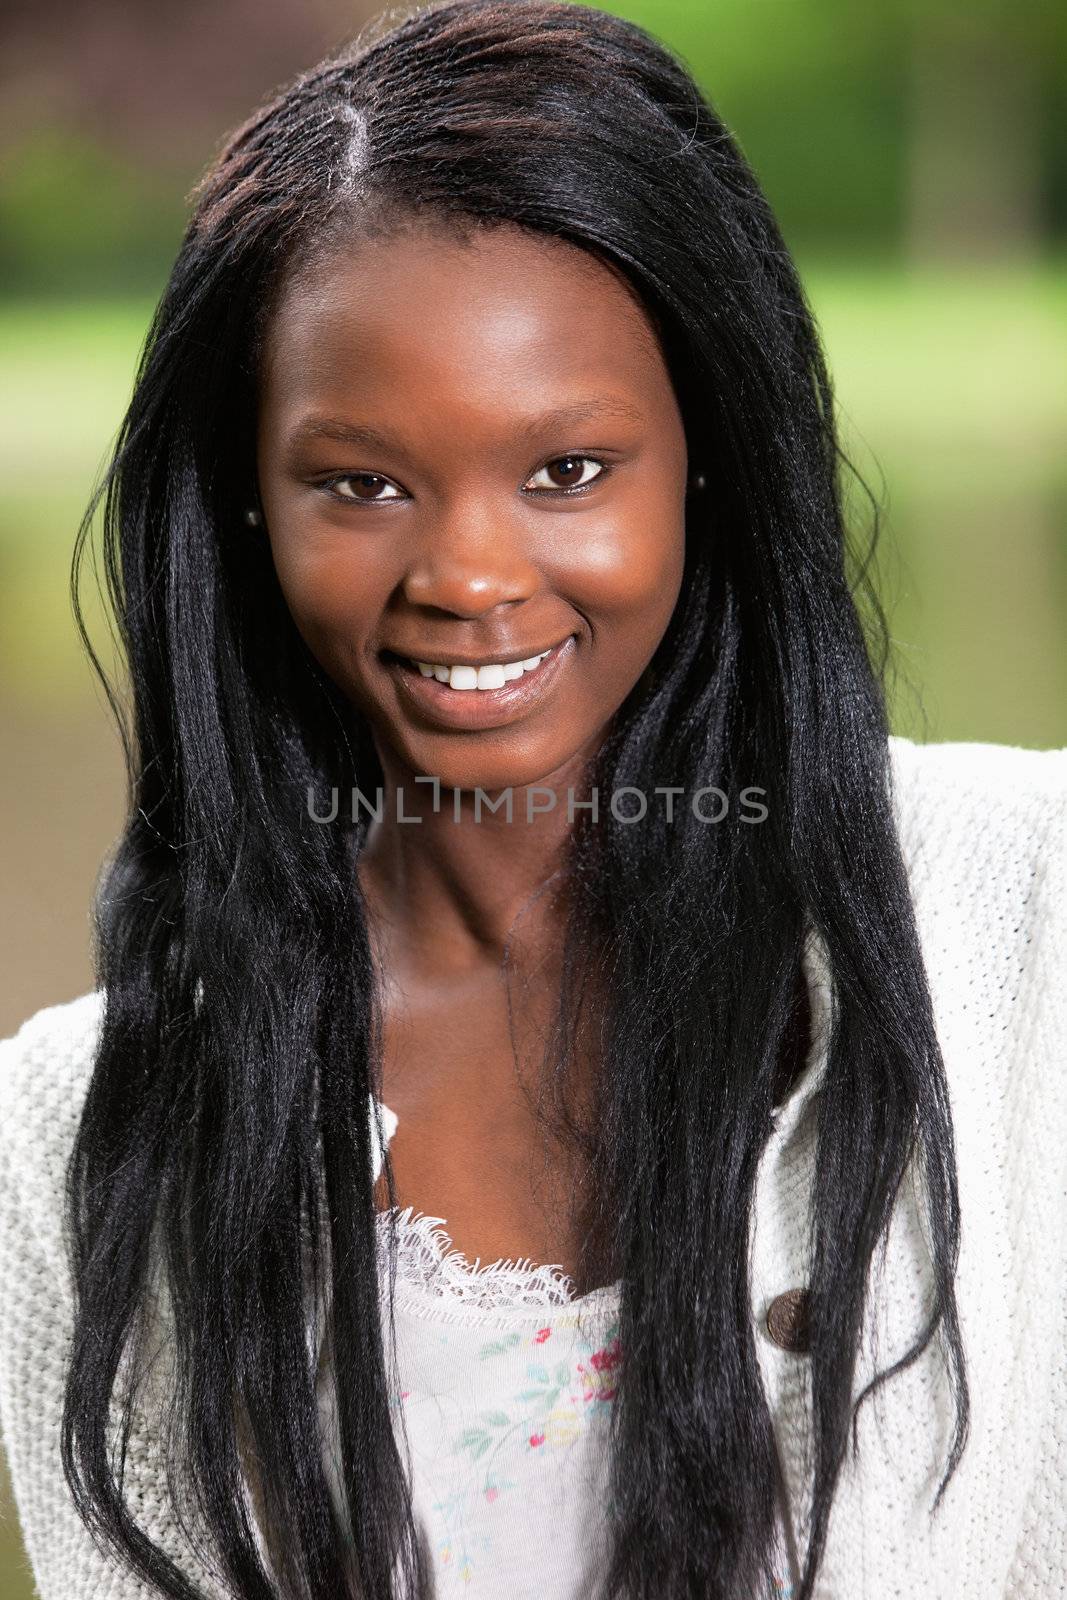 Close-up of confident young African American woman